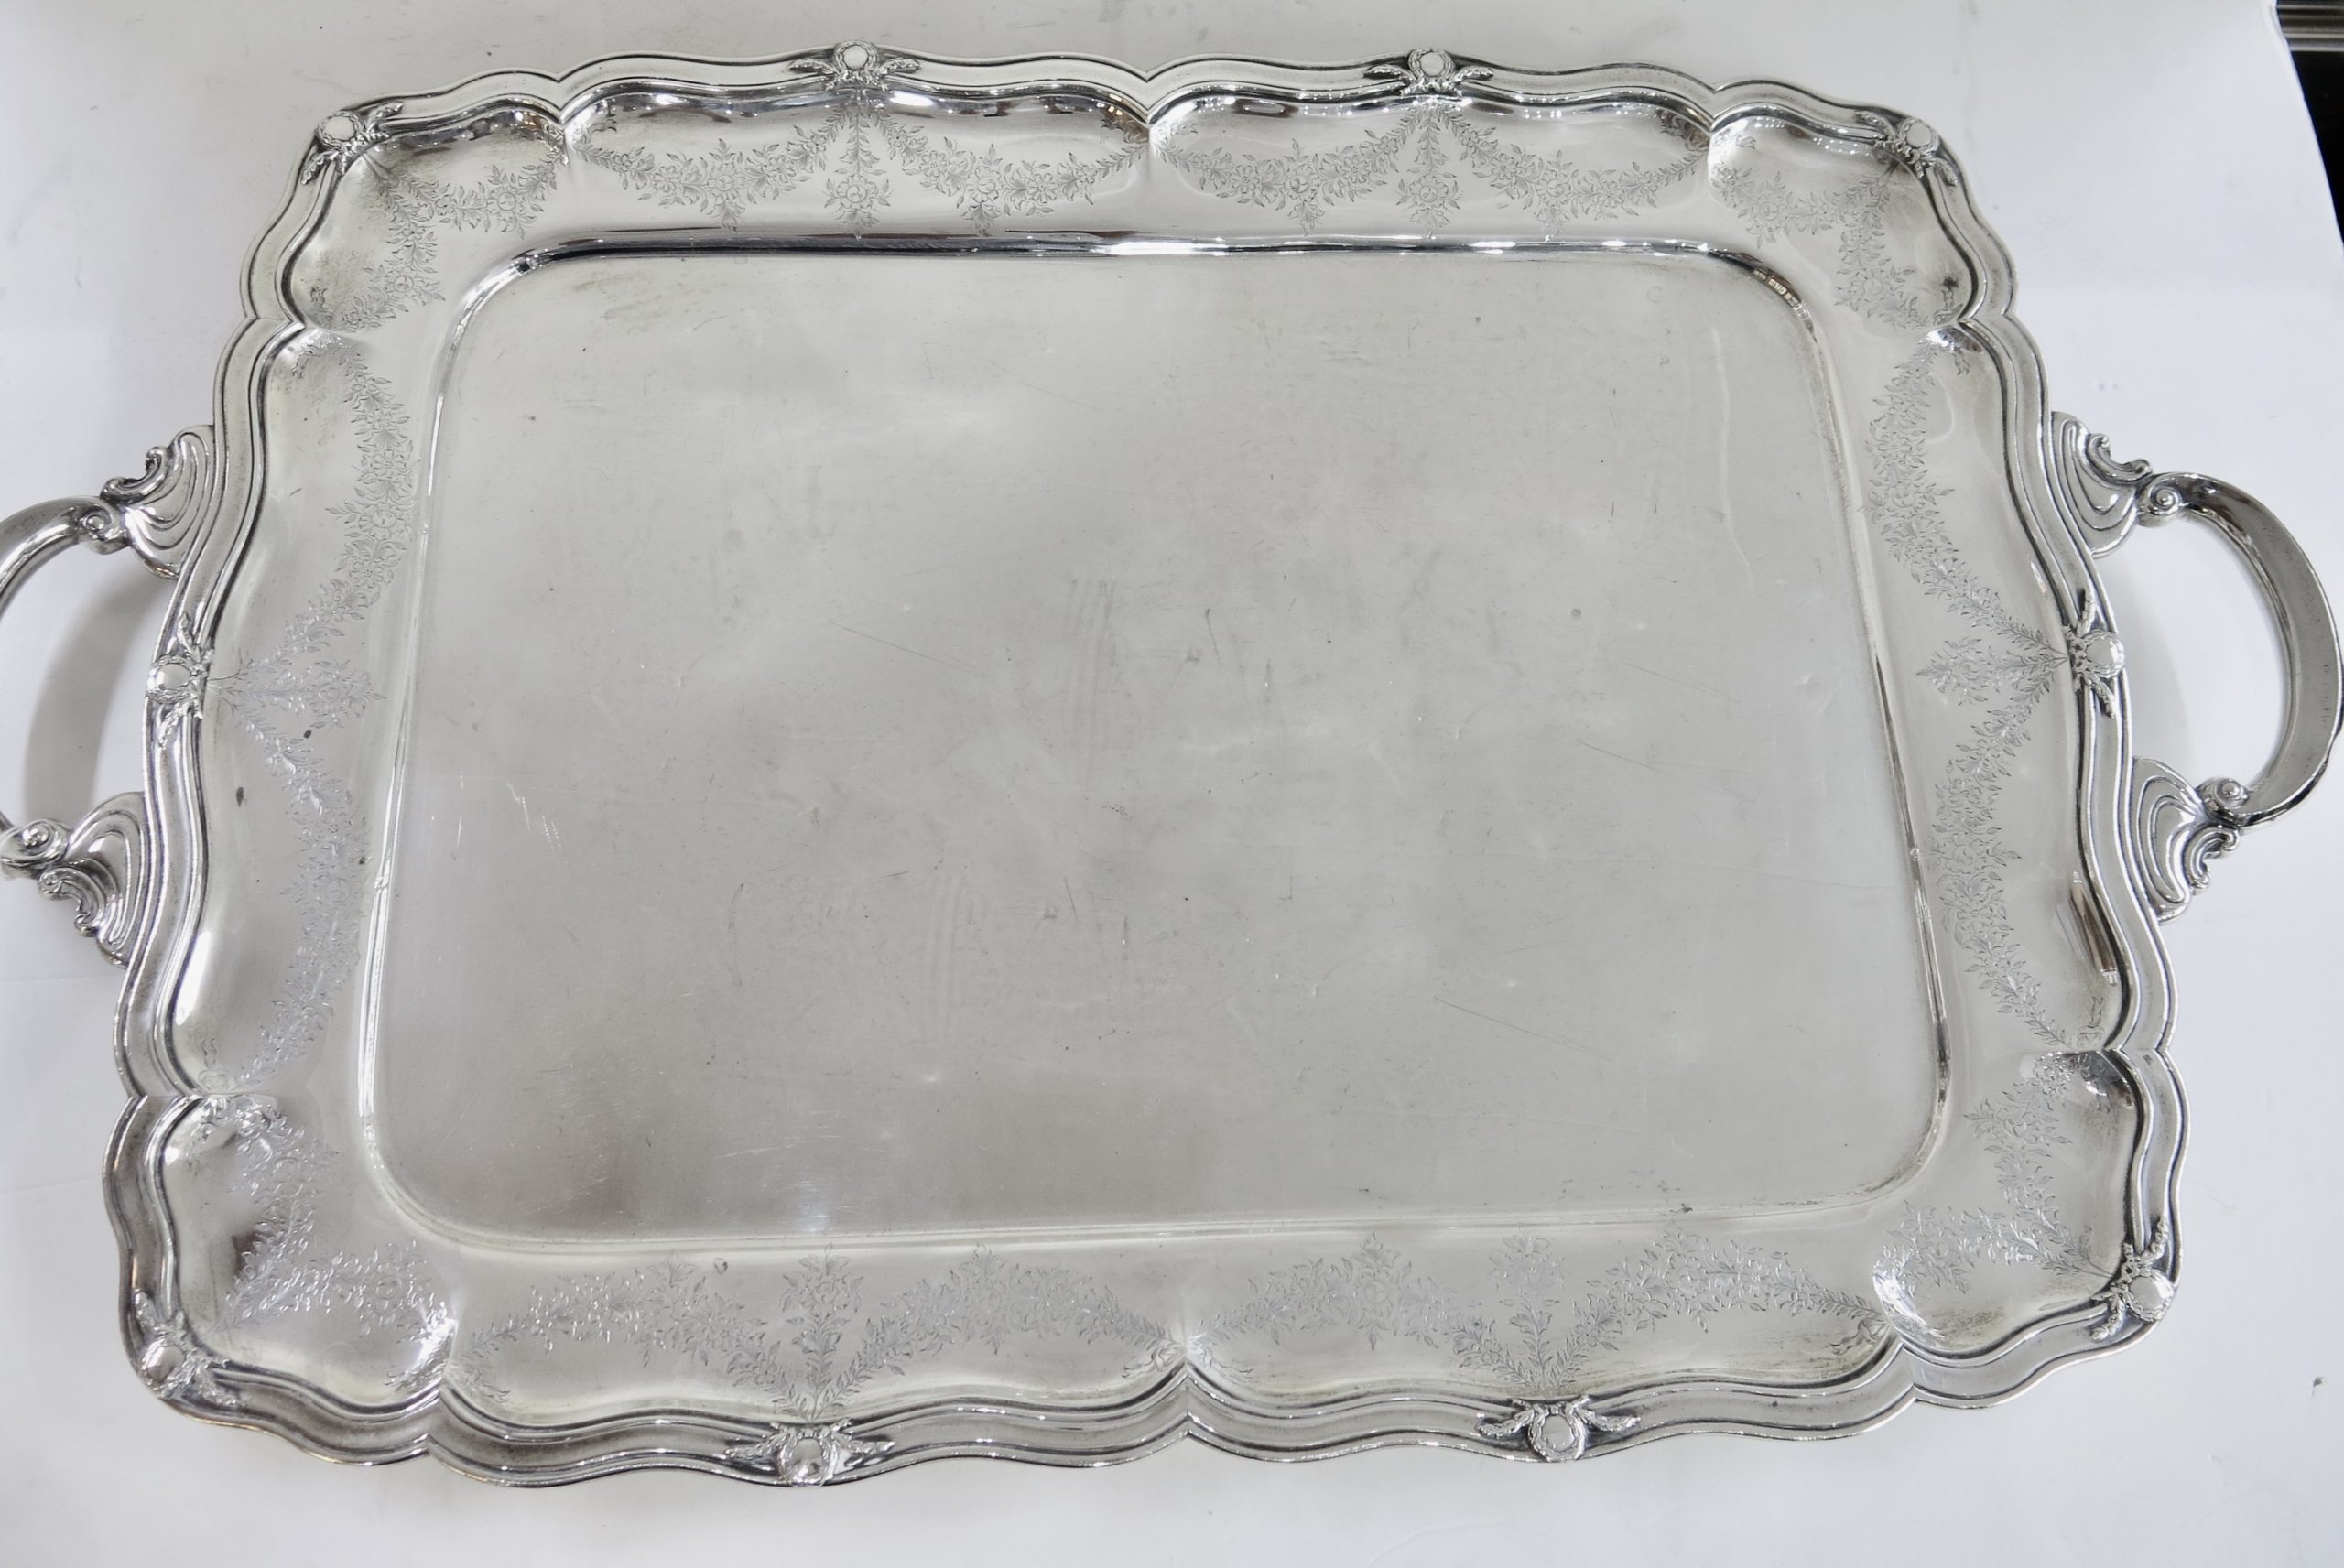 Very Large, Antique Sterling Silver Tray. Black, Starr & Frost, Circa 1890’s